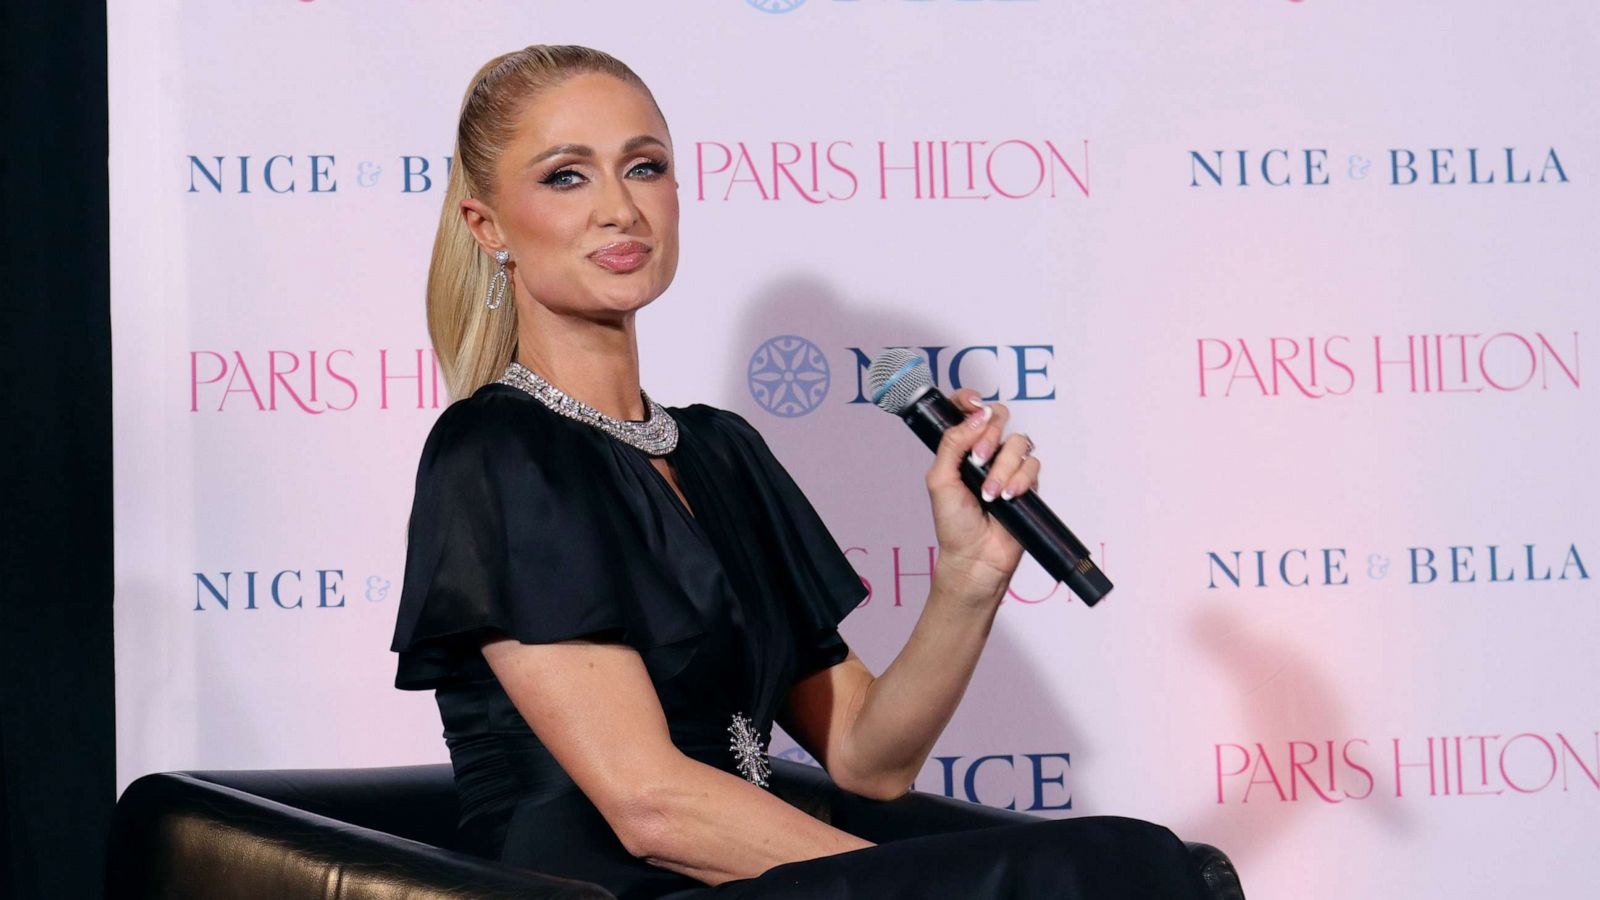 Paris Hilton Comes Full Circle With Walmart from 'Simple Life' to